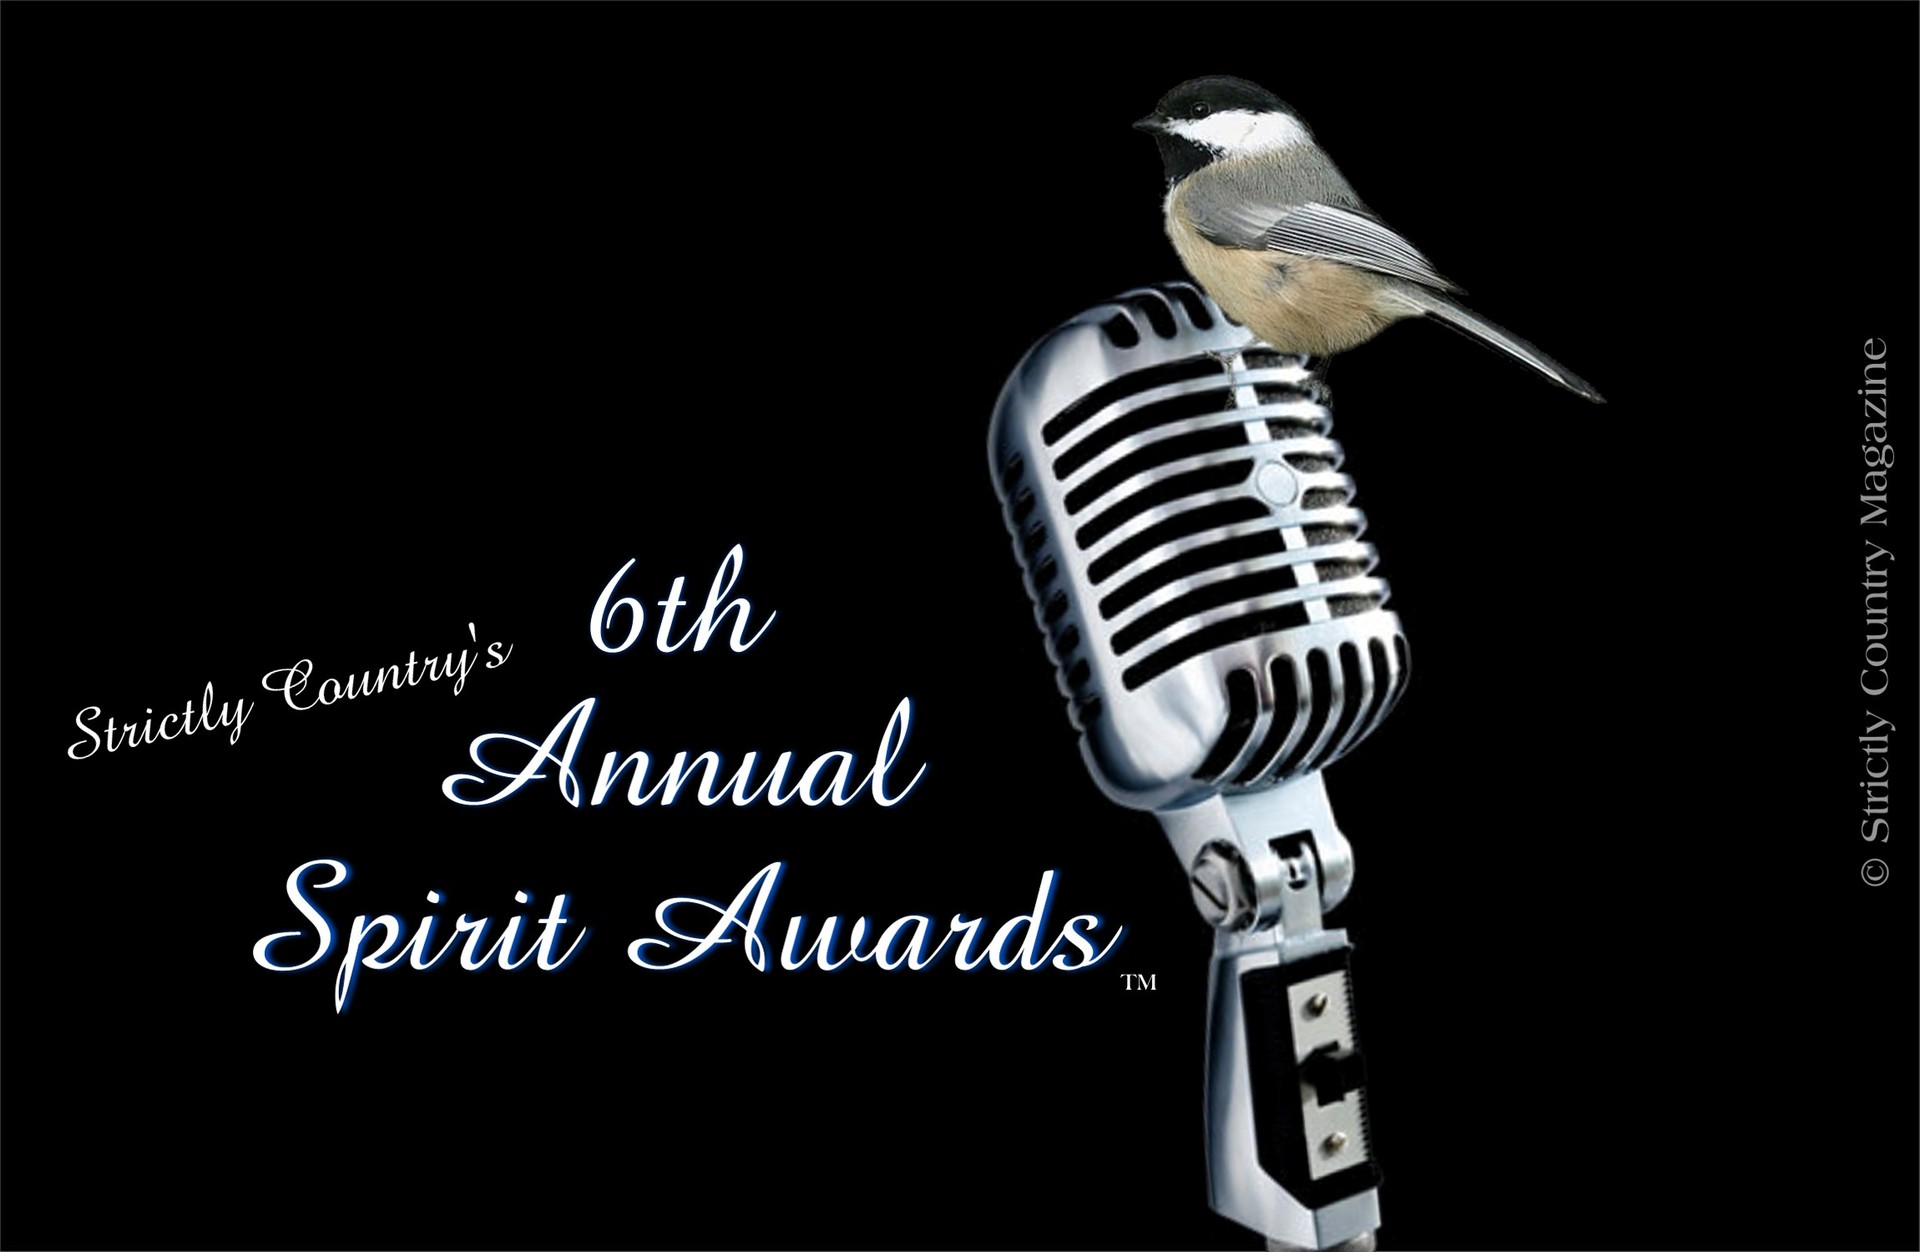 Strictly Country Magazine copyright 6th Annual Spirit Awards official logo